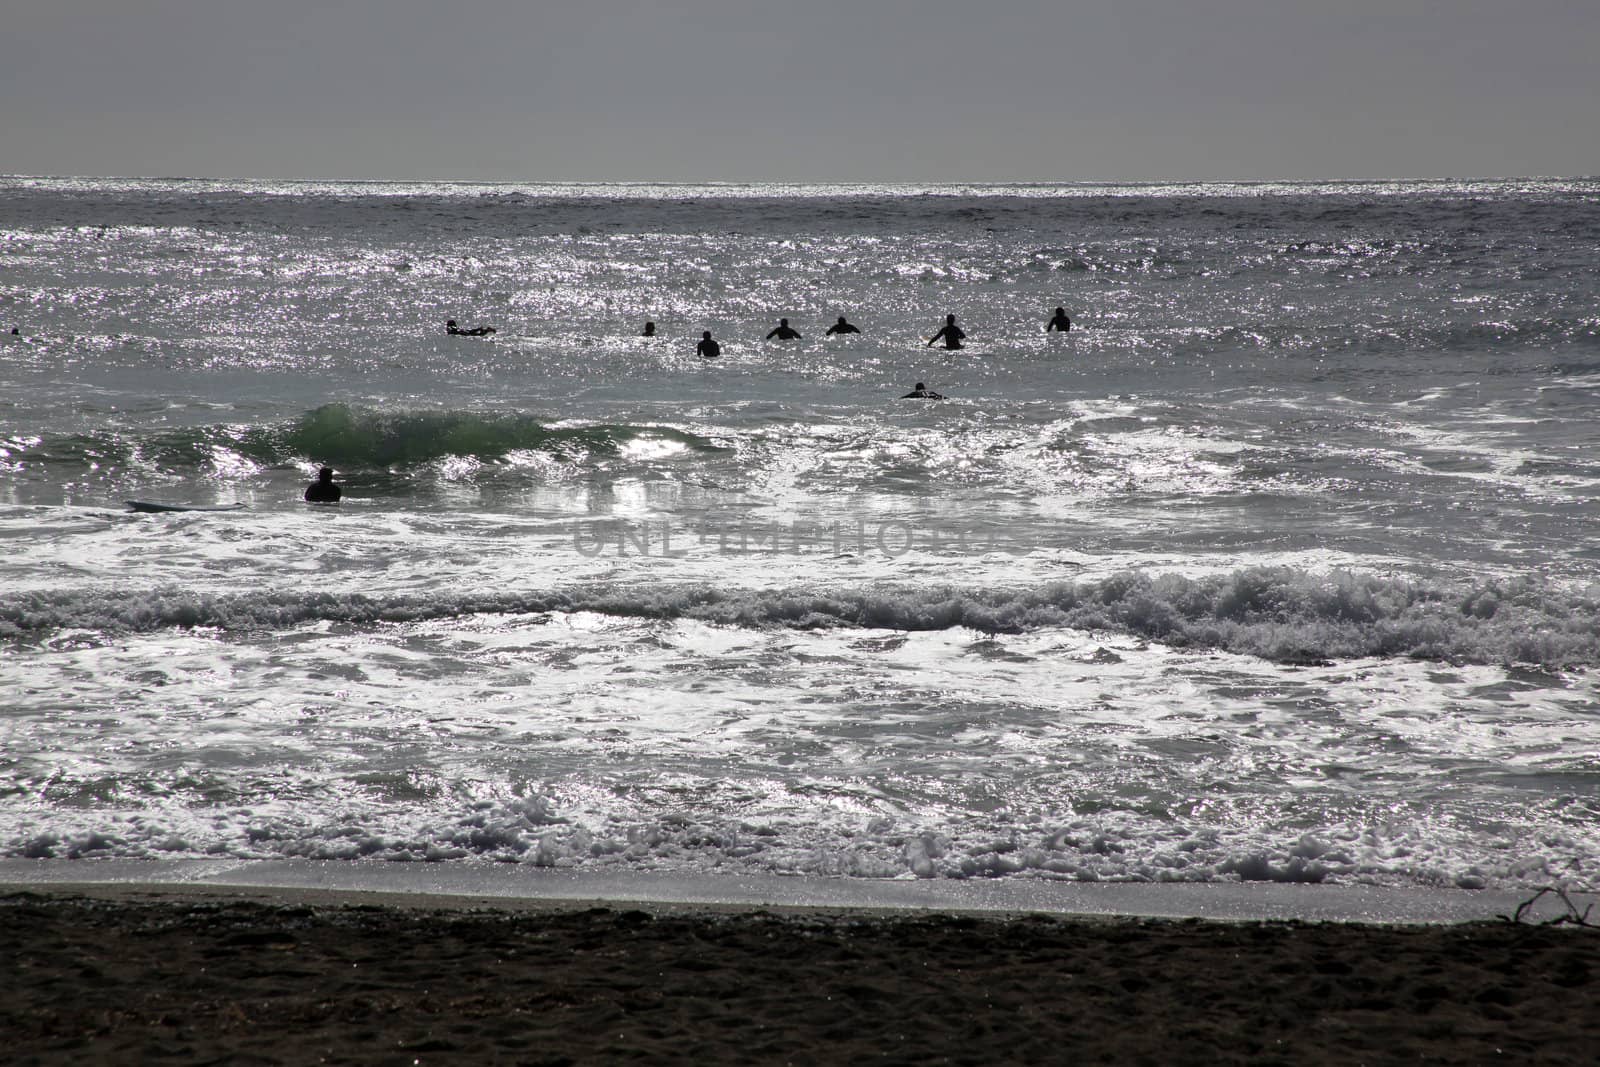 Surfers opening the season in Levanto, Italy.